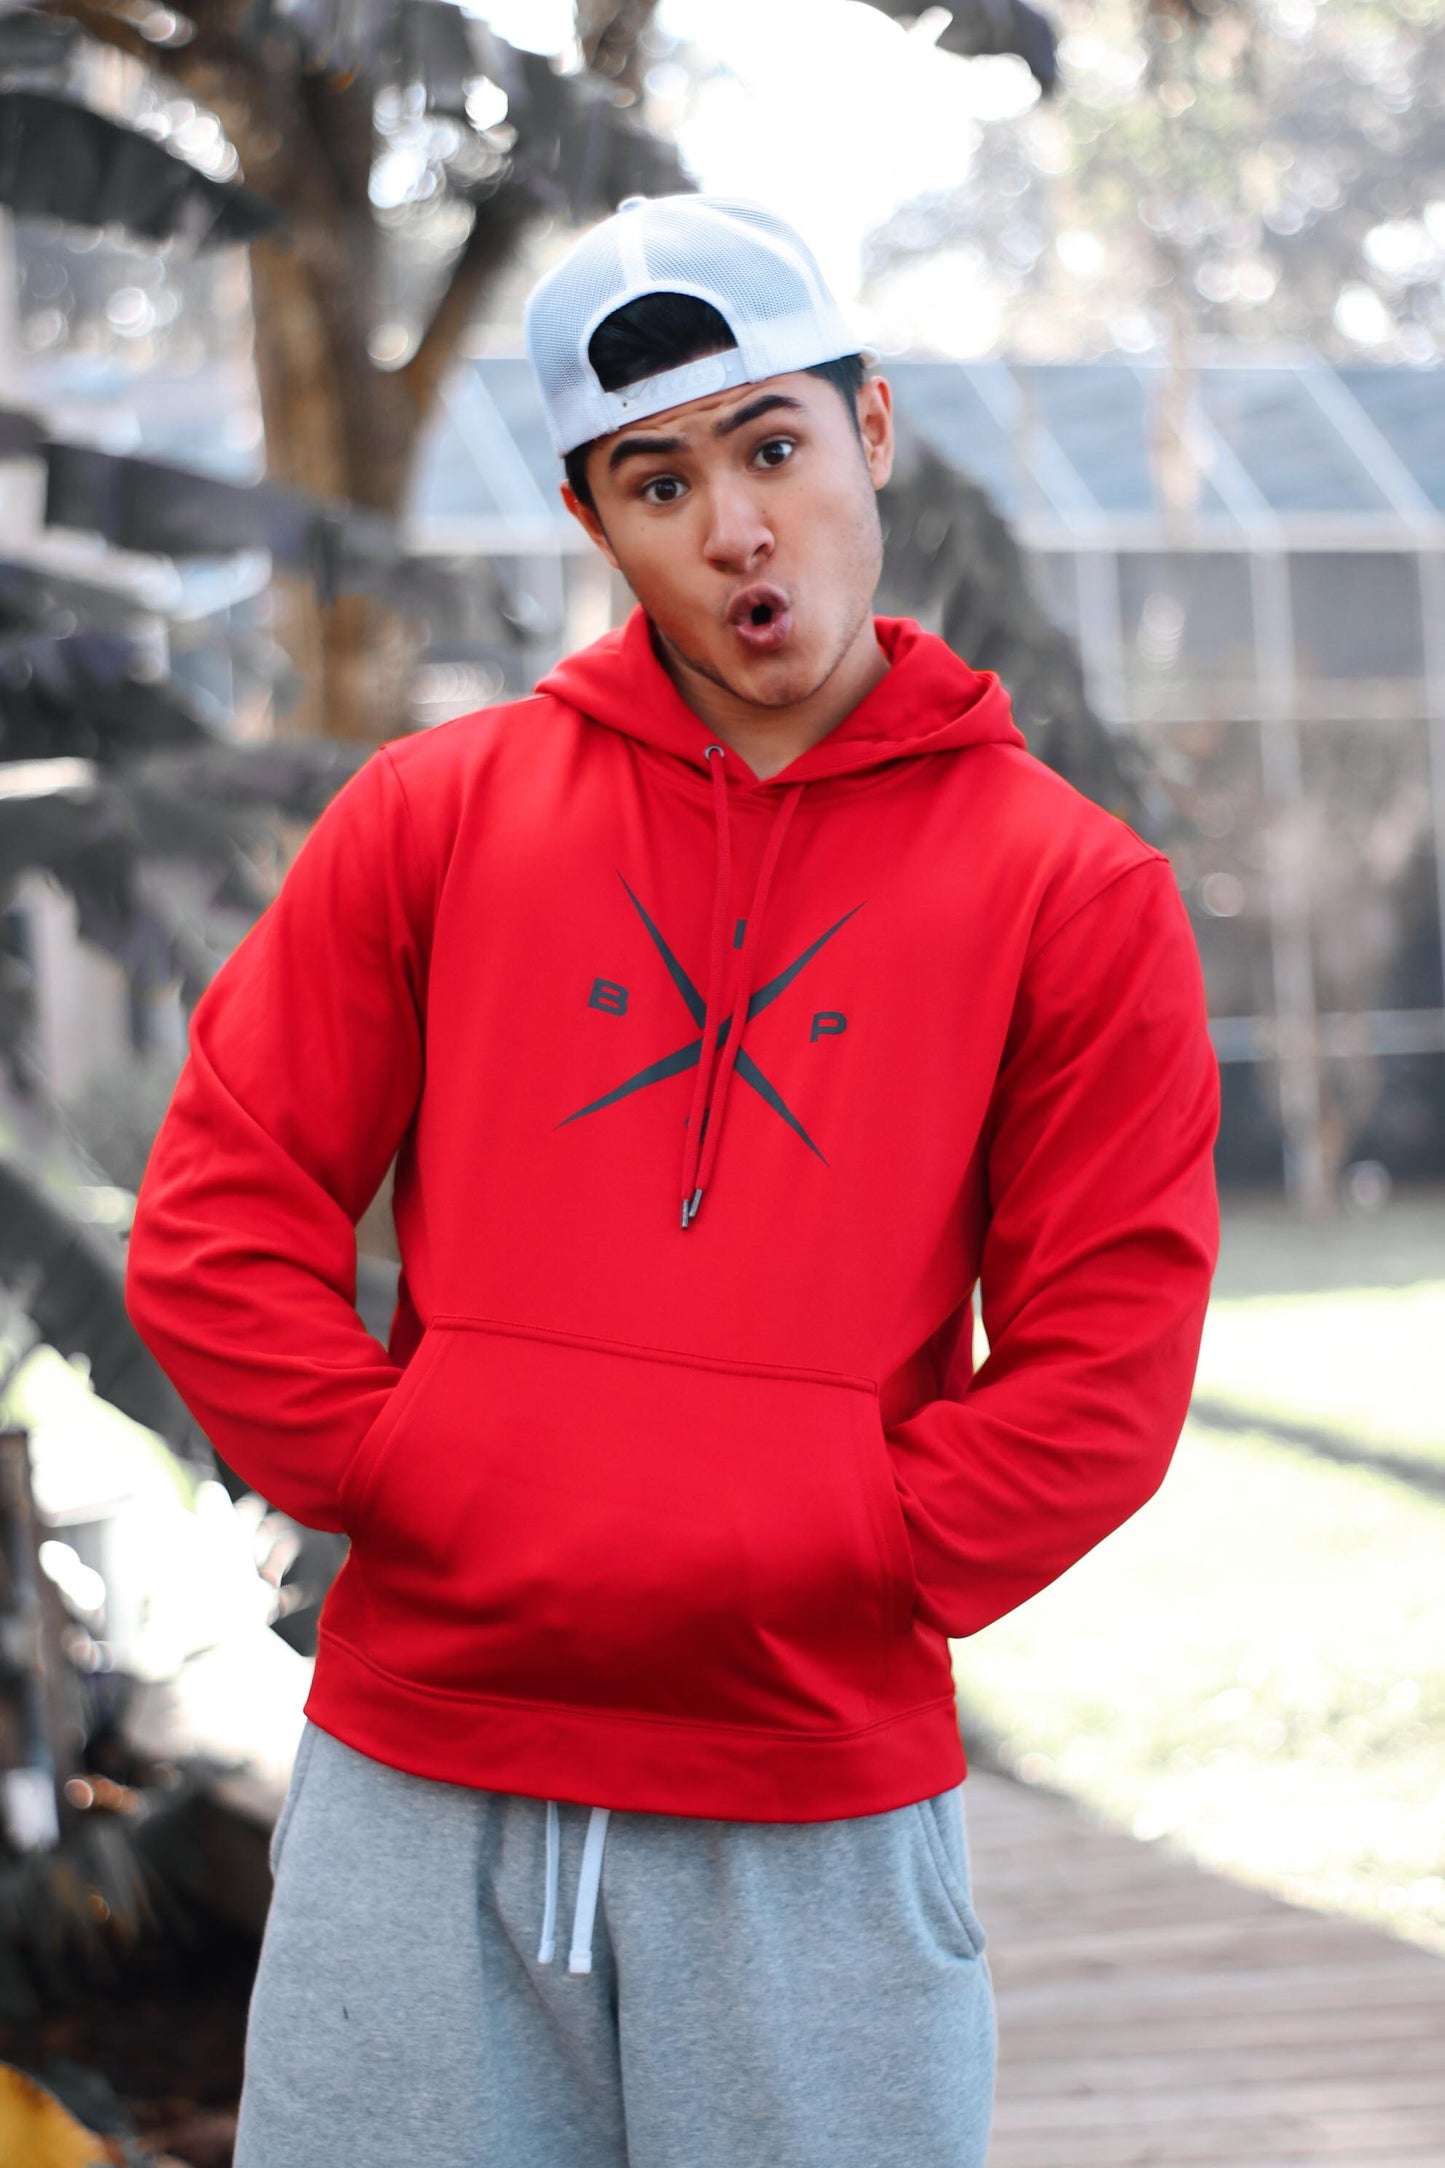 X logo 2.0 - printed on a Red Premium Dry Fit hoodie by Ireland Boys productions viral youtube channel featuring Nick Ireland